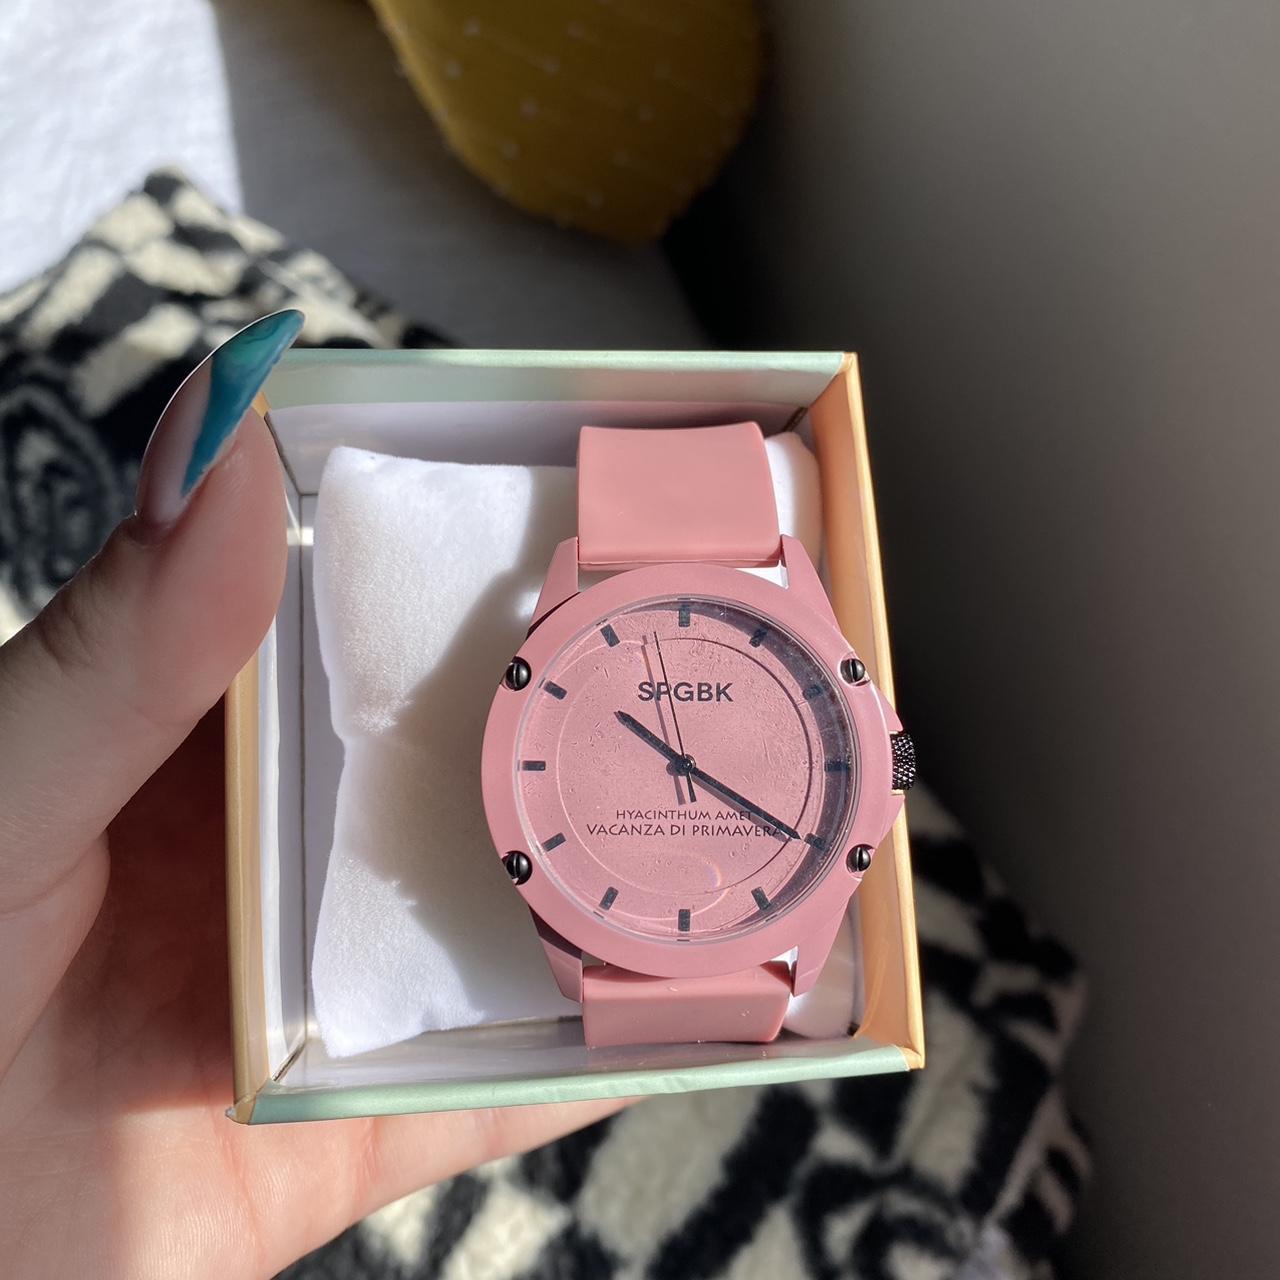 Jewelry + Watches - Urban Outfitters | Gold watches women, Fancy watches,  Watches women simple